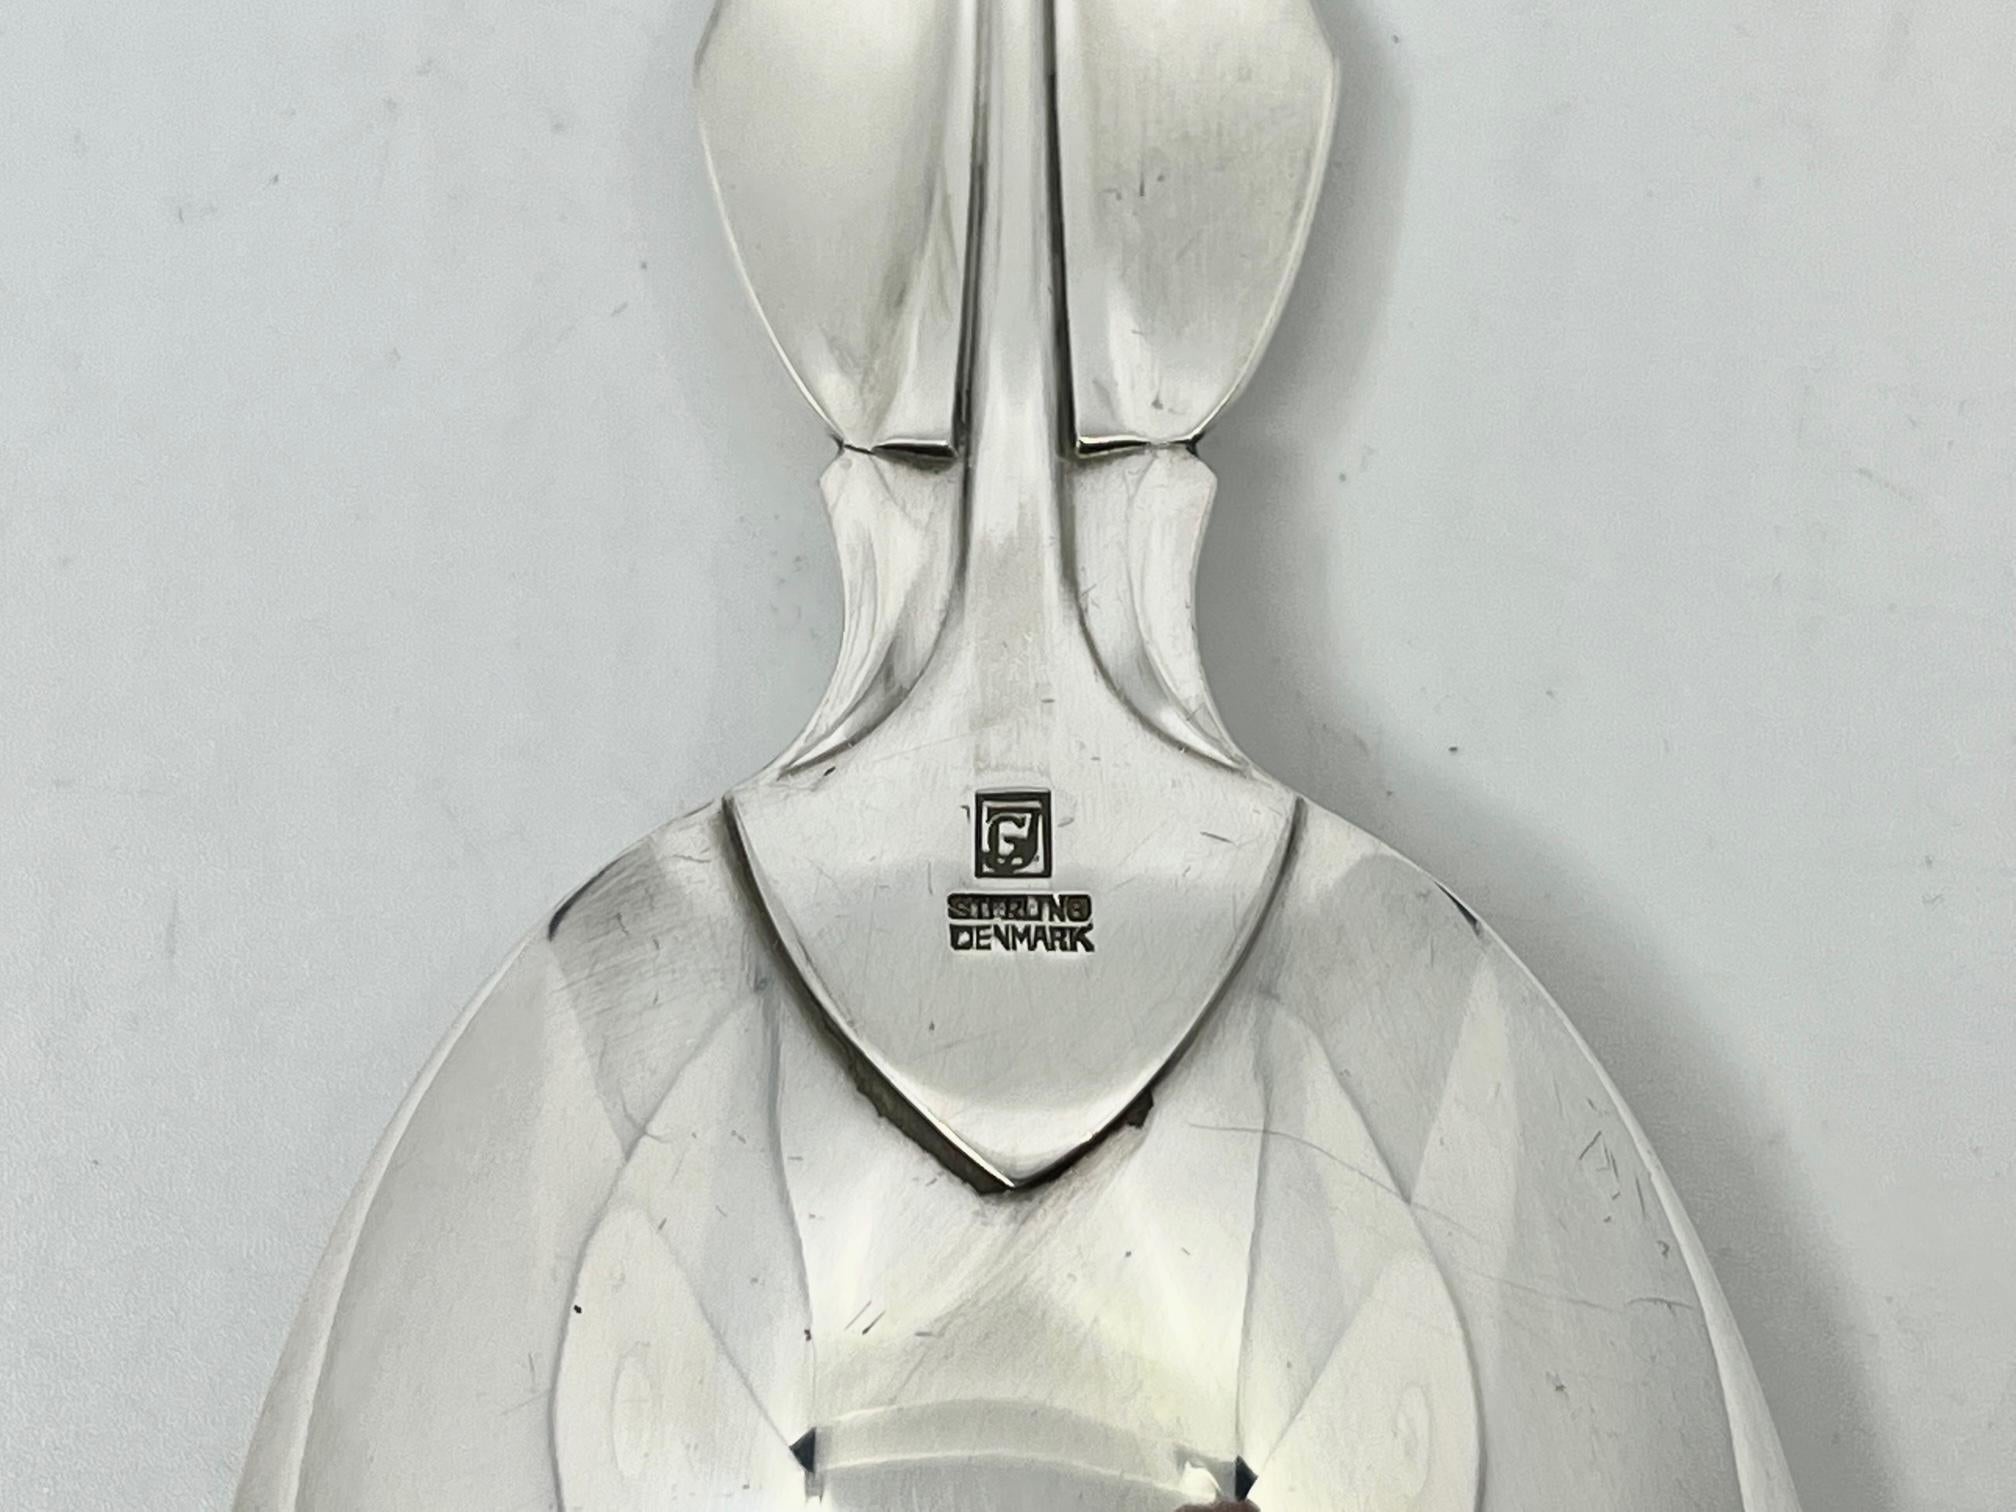 A sterling silver Georg Jensen large serving spoon, item #111 in the Elsinore pattern, design #59 by Harald Nielsen from 1937.

Additional information:
Material: Sterling silver
Styles: Art Deco
Hallmarks: With Georg Jensen hallmark, made in